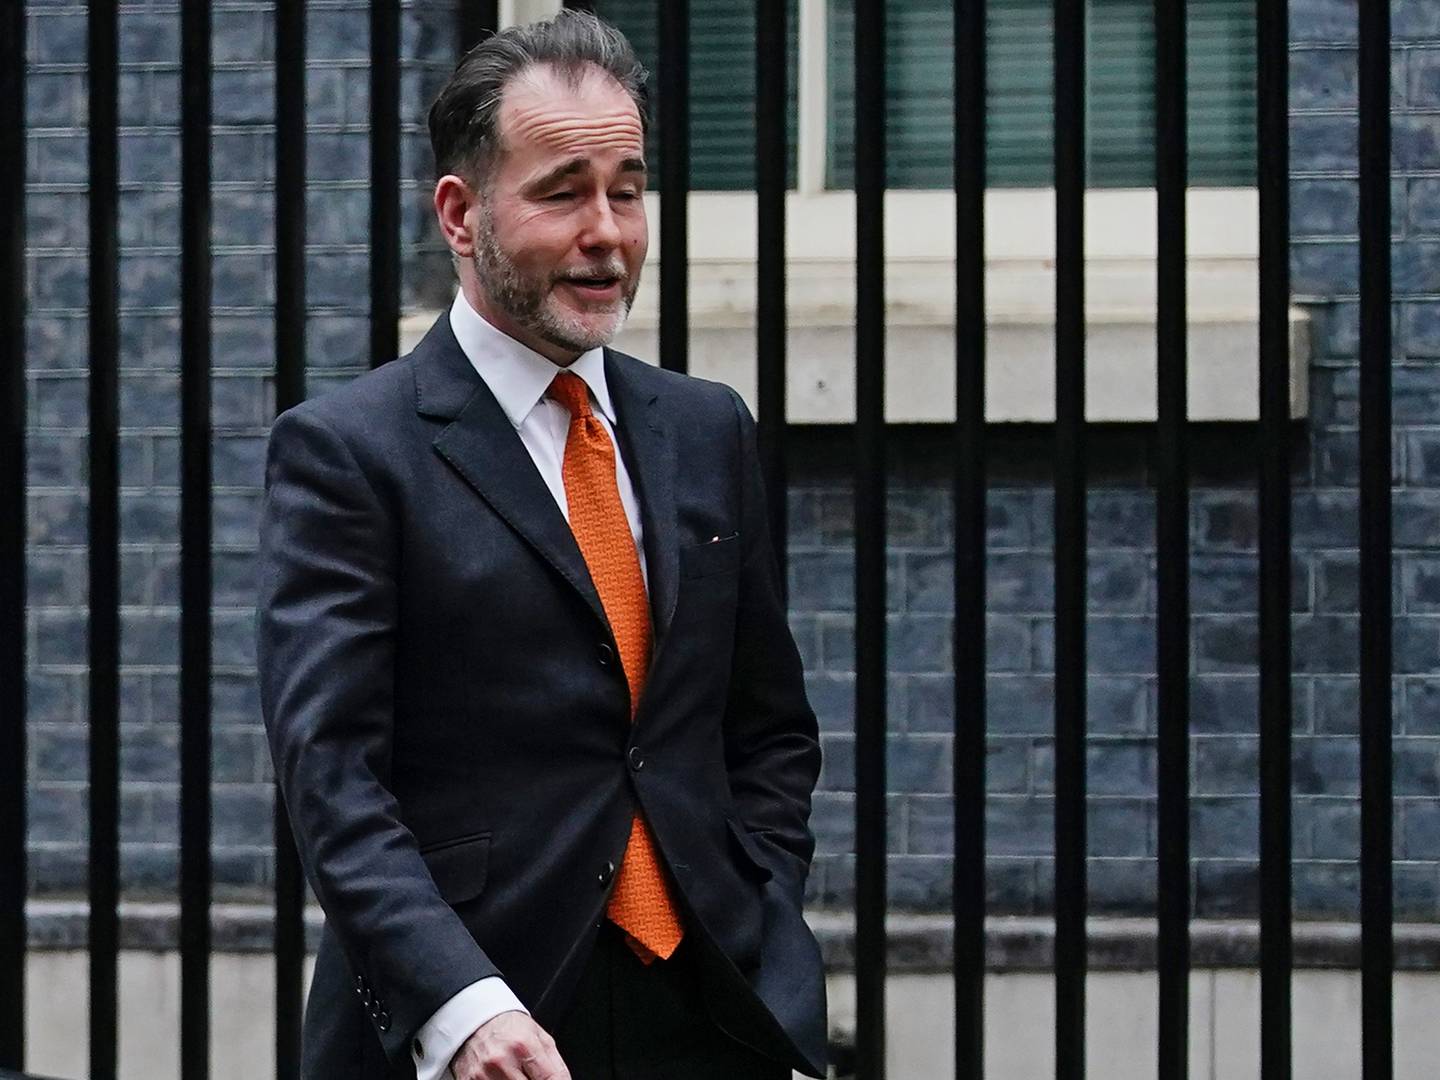 The prime minister had no knowledge of allegations made against Chris Pincher, pictured, when he appointed him Tory deputy chief whip in February, ministers say. PA